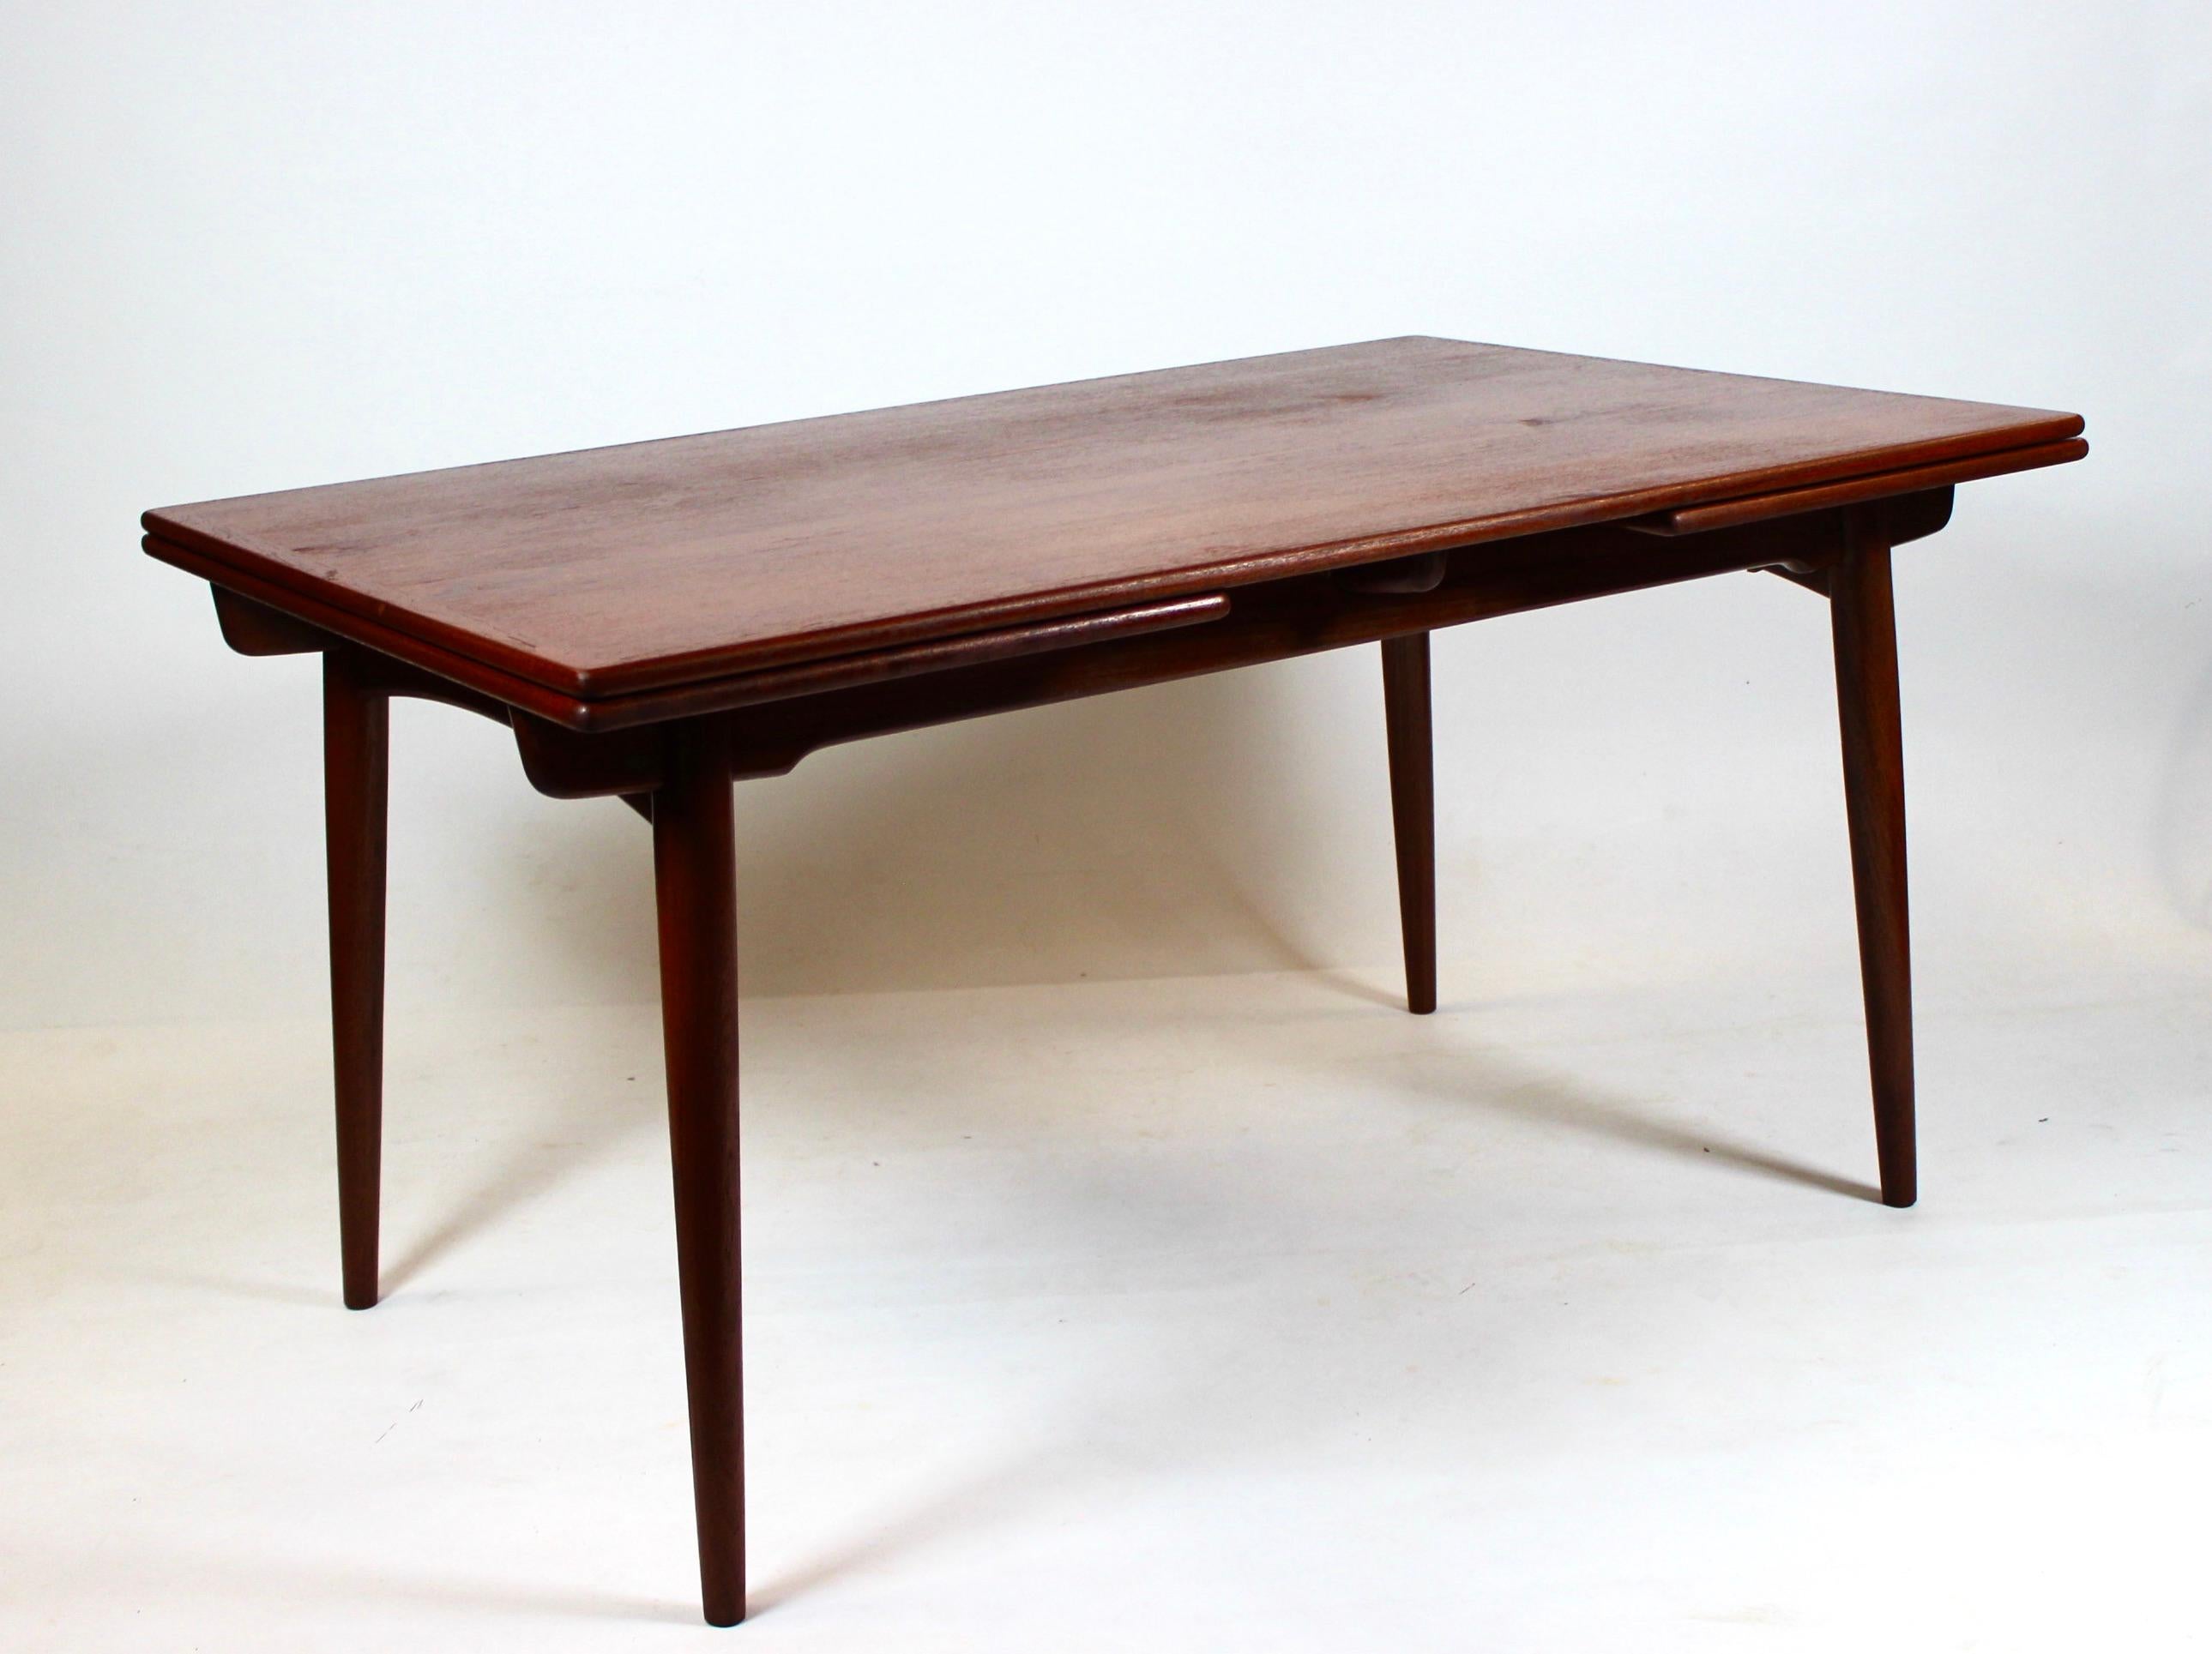 Mid-20th Century Dining Table with Extensions in Teak Designed by Hans J. Wegner, 1960s For Sale